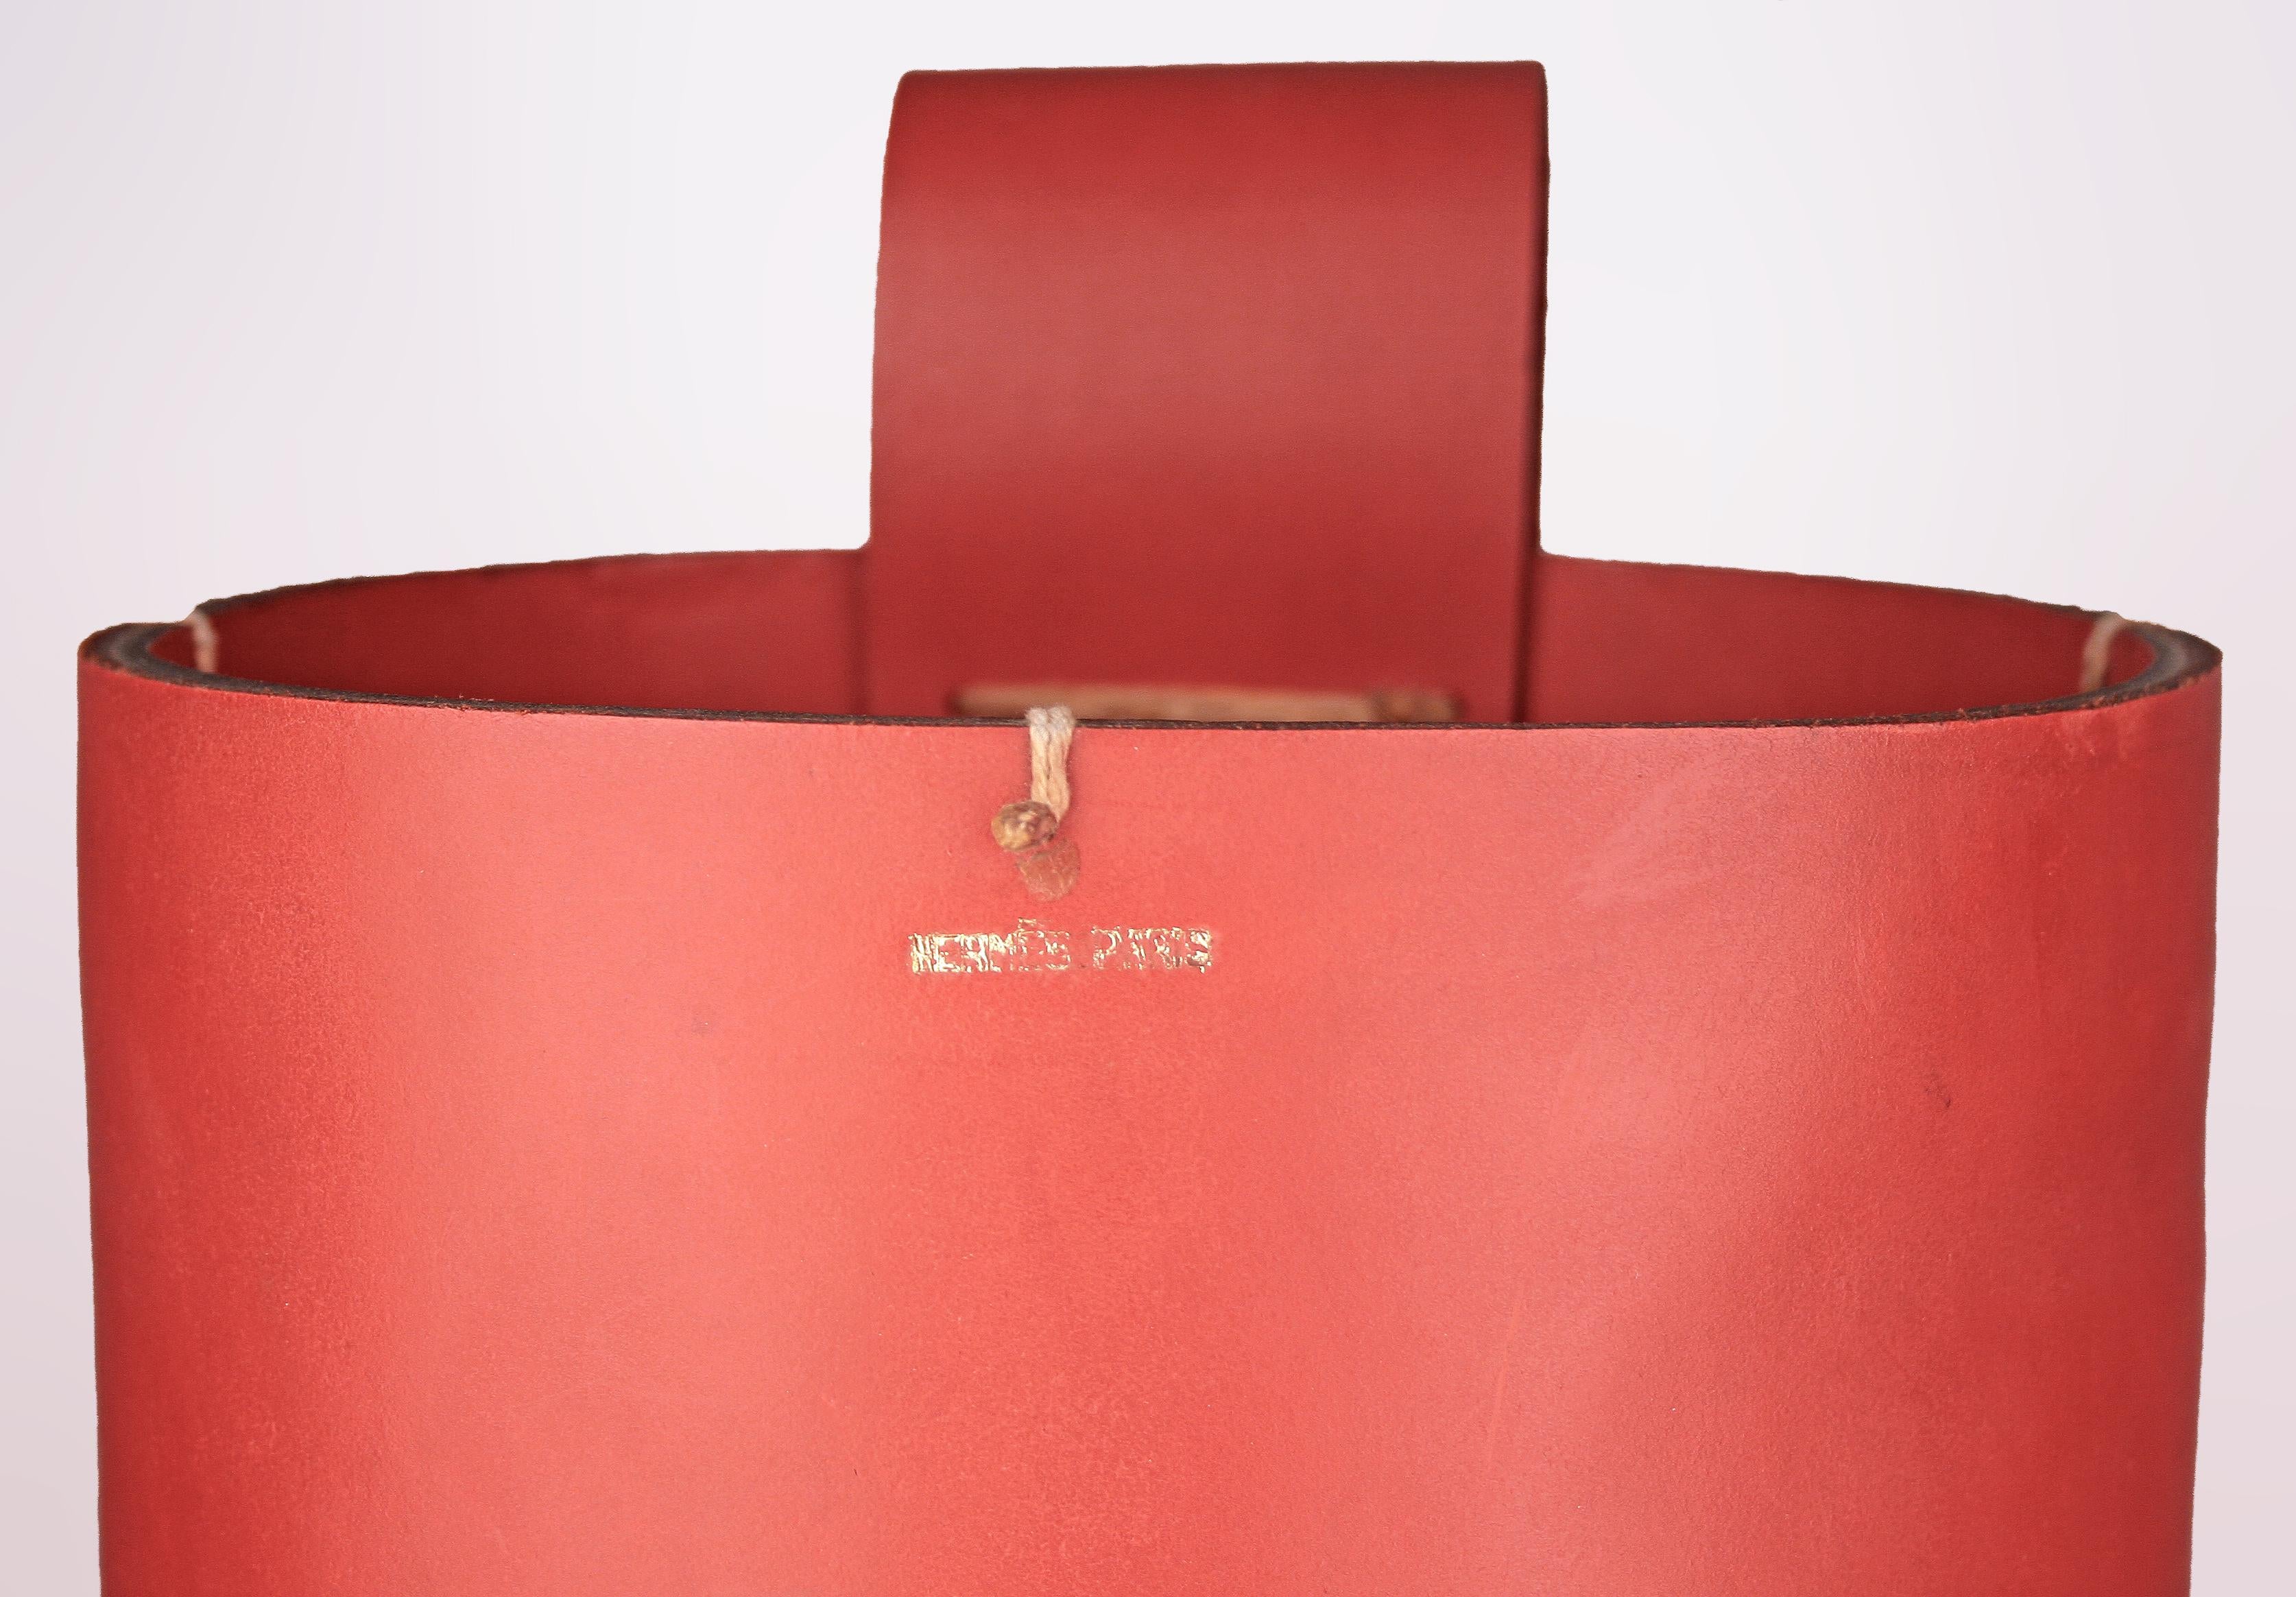 Mid-20th C. Modern French Red Leather Cylindrical Umbrella Stand by Hermès Paris For Sale 1